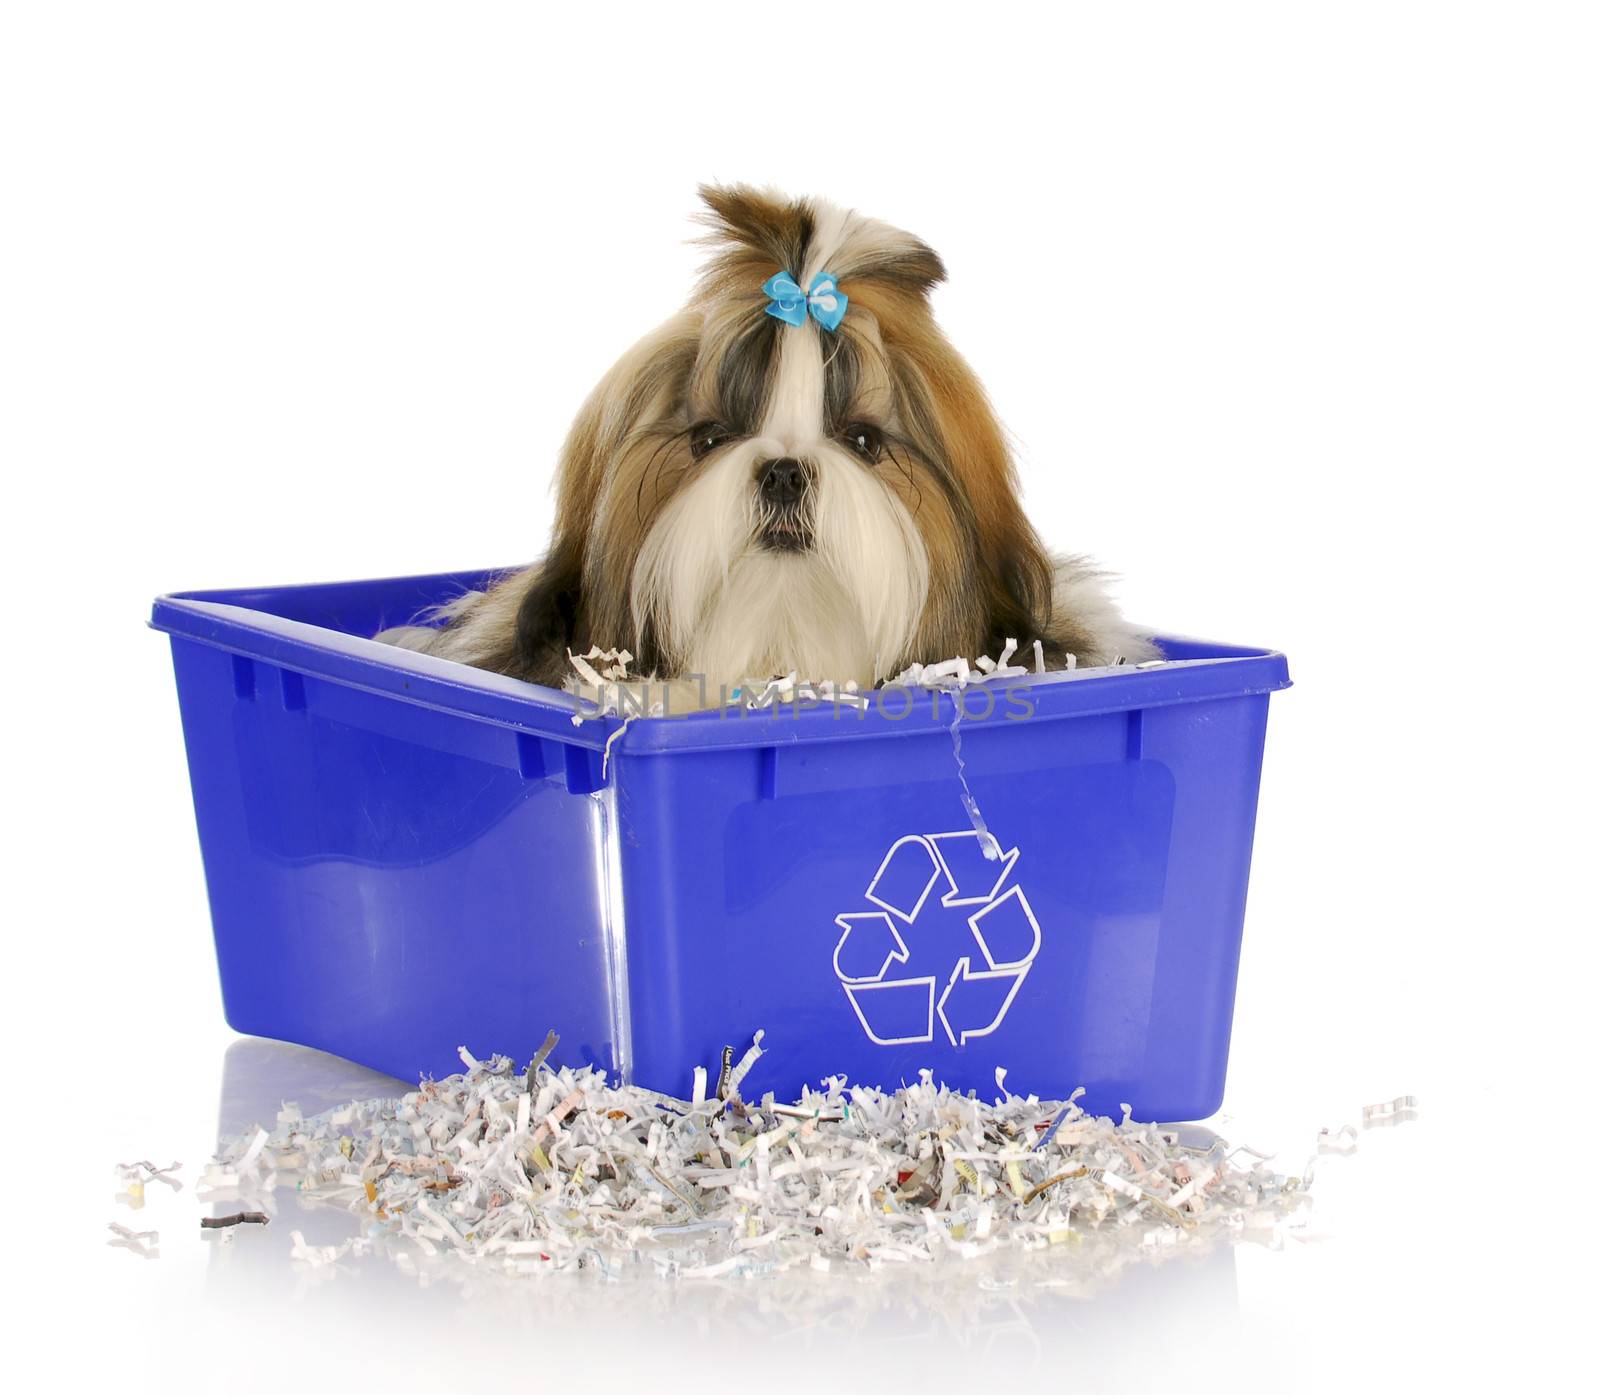 puppy in recycle bin by willeecole123